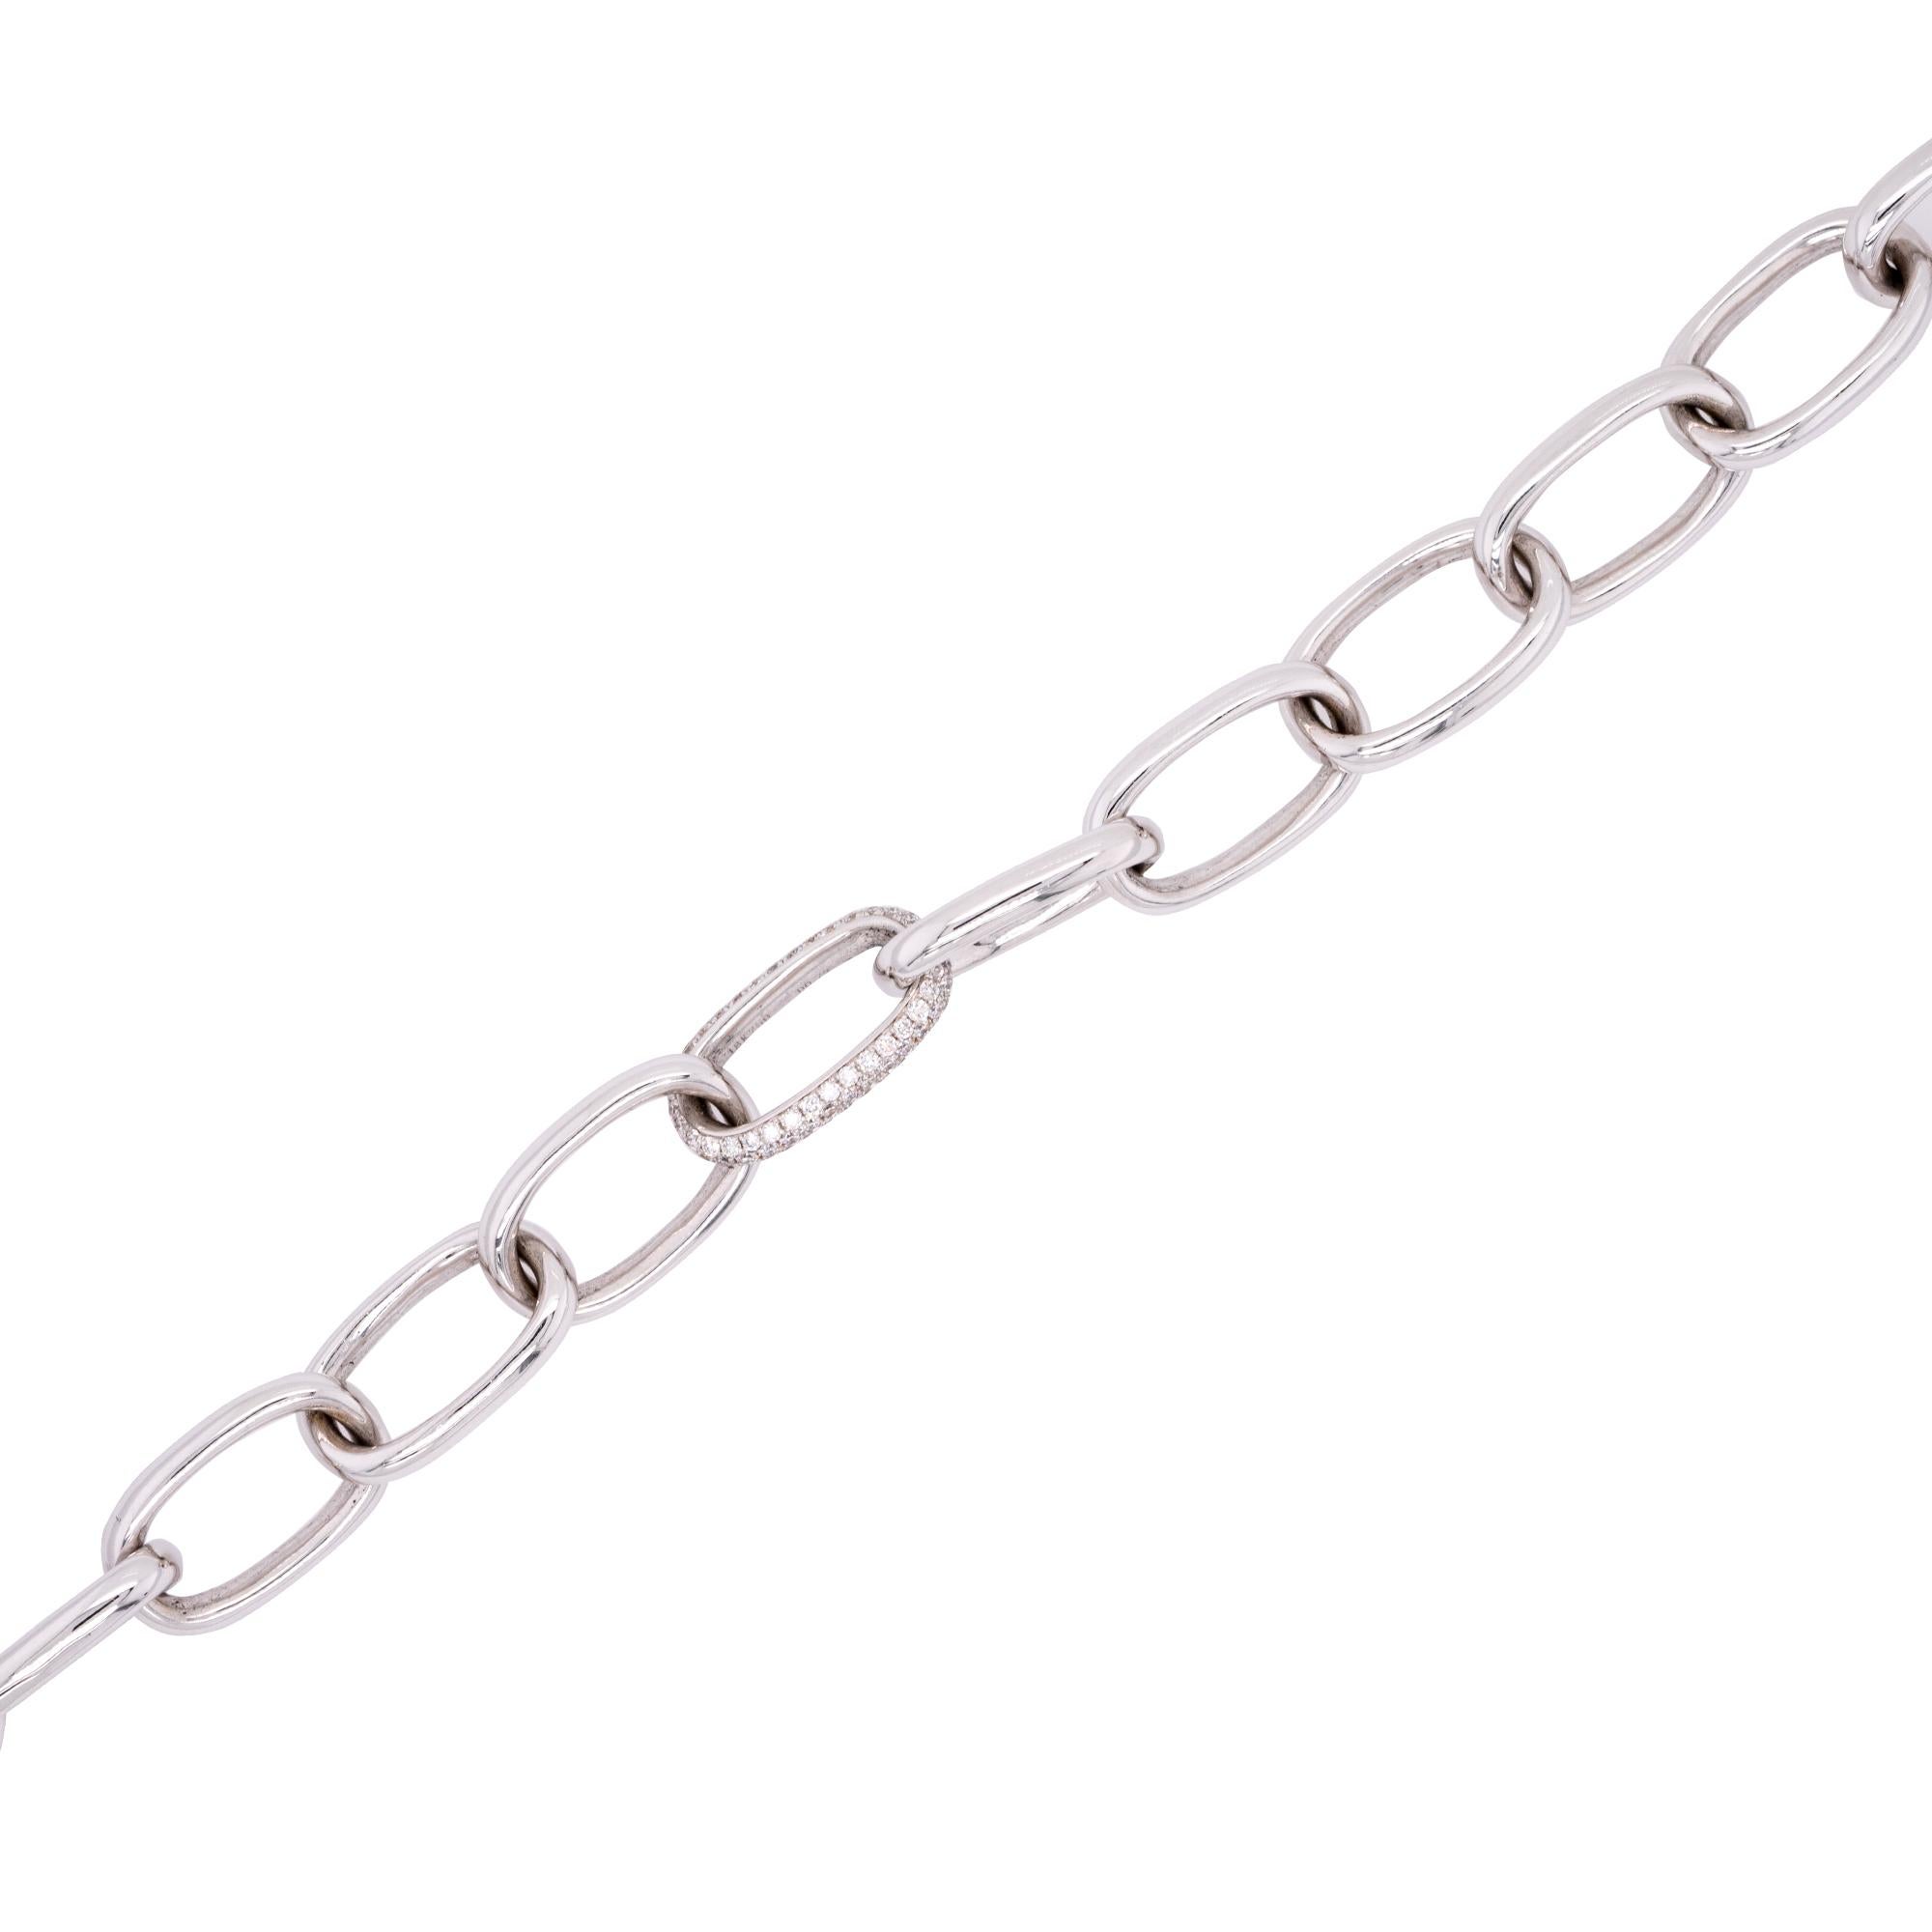 This 14k white gold link bracelet features 0.72 carats of round cut natural diamonds with a G/H color and VS clarity. The bracelet measures 7 inches in length and has a total weight of 26.5 grams (17 dwt). The pave design of the diamonds adds a